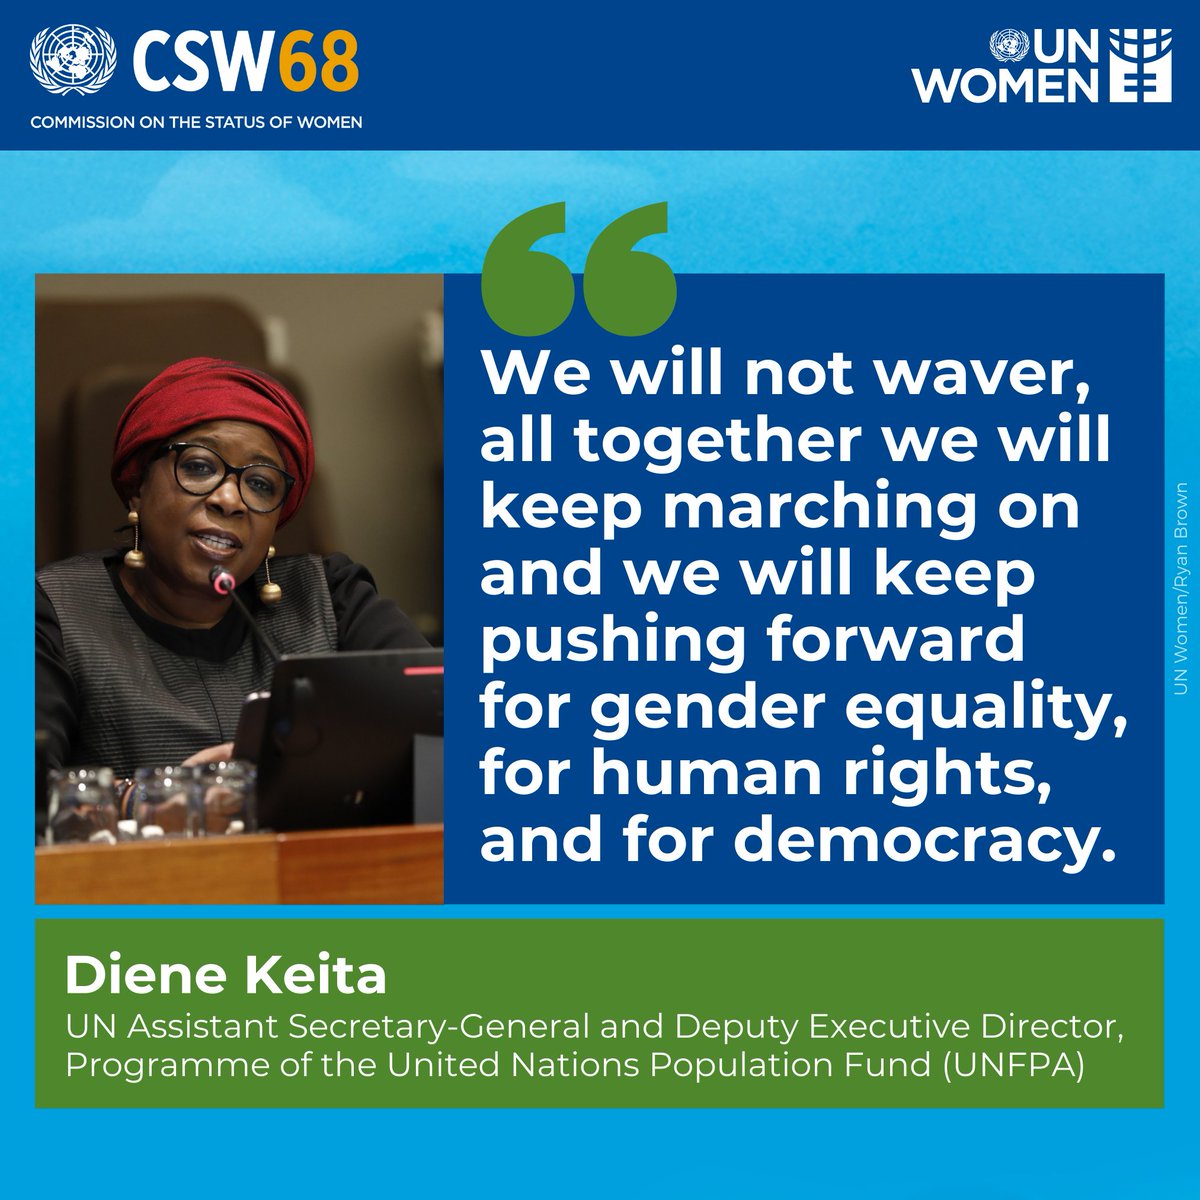 “We will not waver, all together we will keep marching on and we will keep pushing forward for #GenderEquality, for human rights, and for democracy.” - @dienekeita, Deputy Executive Director of @UNFPA speaking at today's #CSW68 side-event. #InvestInWomen